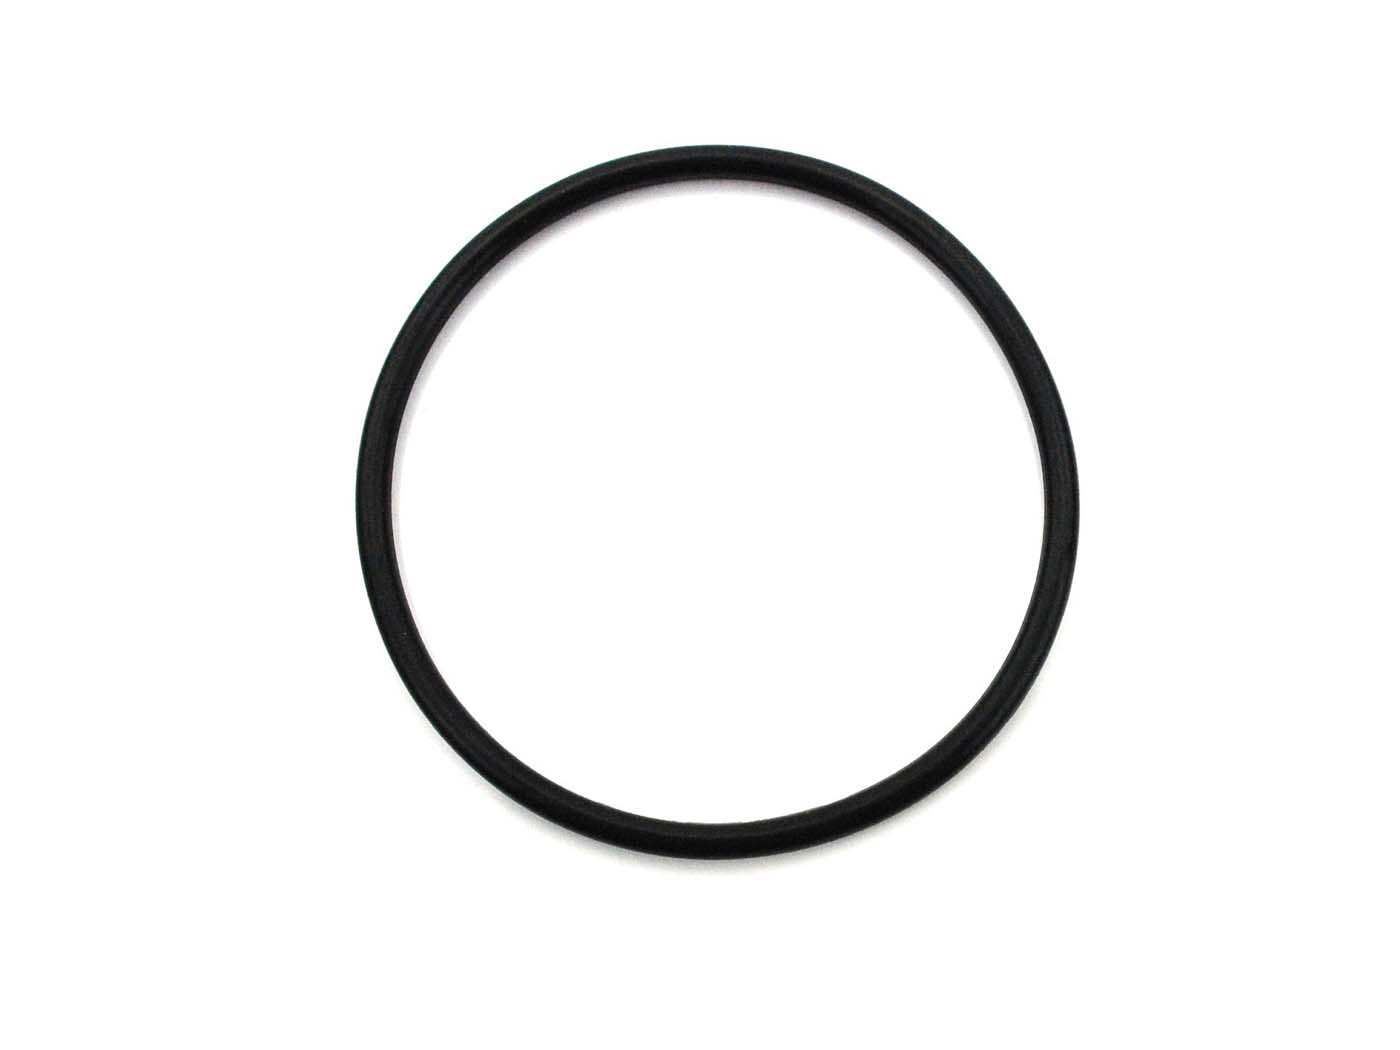 O-ring Seal Drilastic For Moped 712 F Luxury And Comfort 25, Super Moped 713 Super-Luxury 40, 725 Mini-Bike, 726 Mokick 730, 731 Sport, 732 Sport